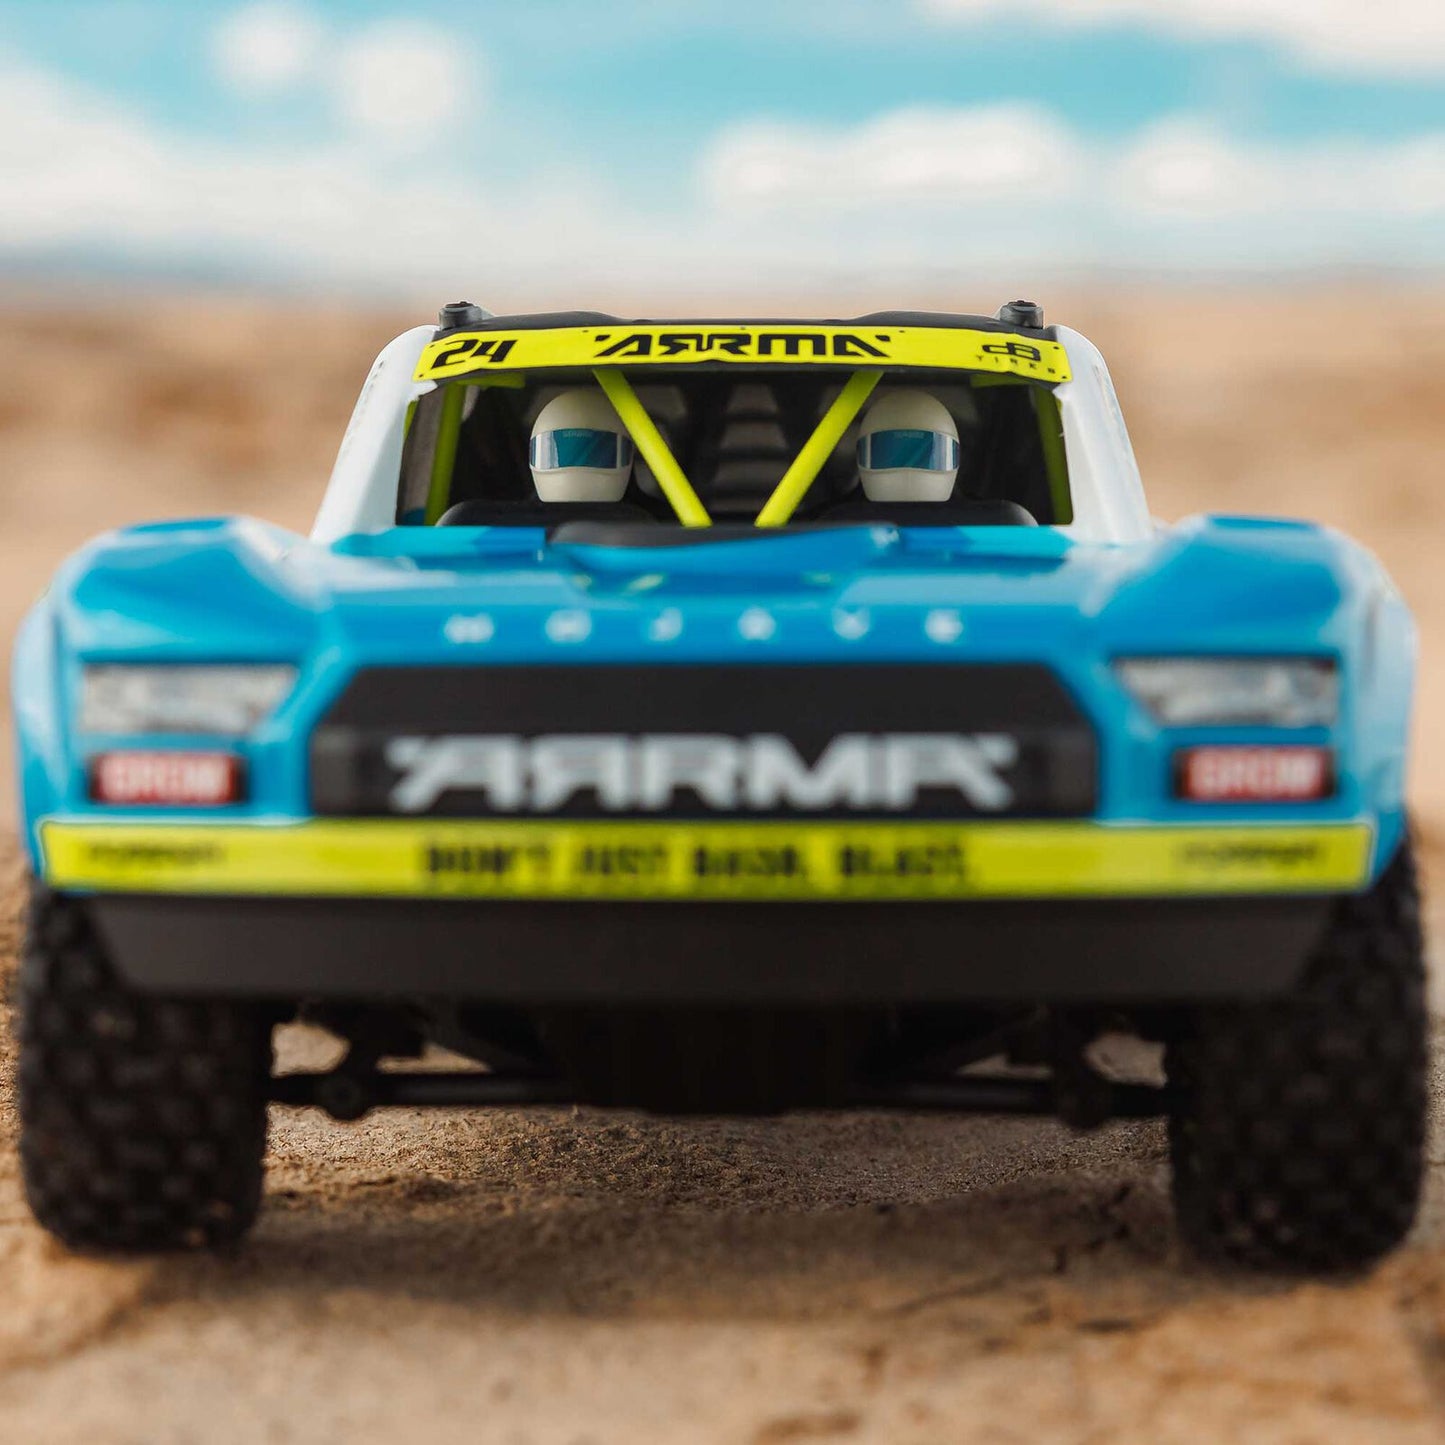 MOJAVE GROM MEGA 380 Brushed 4X4 Small Scale Desert Truck RTR with Battery & Charger, Blue/White